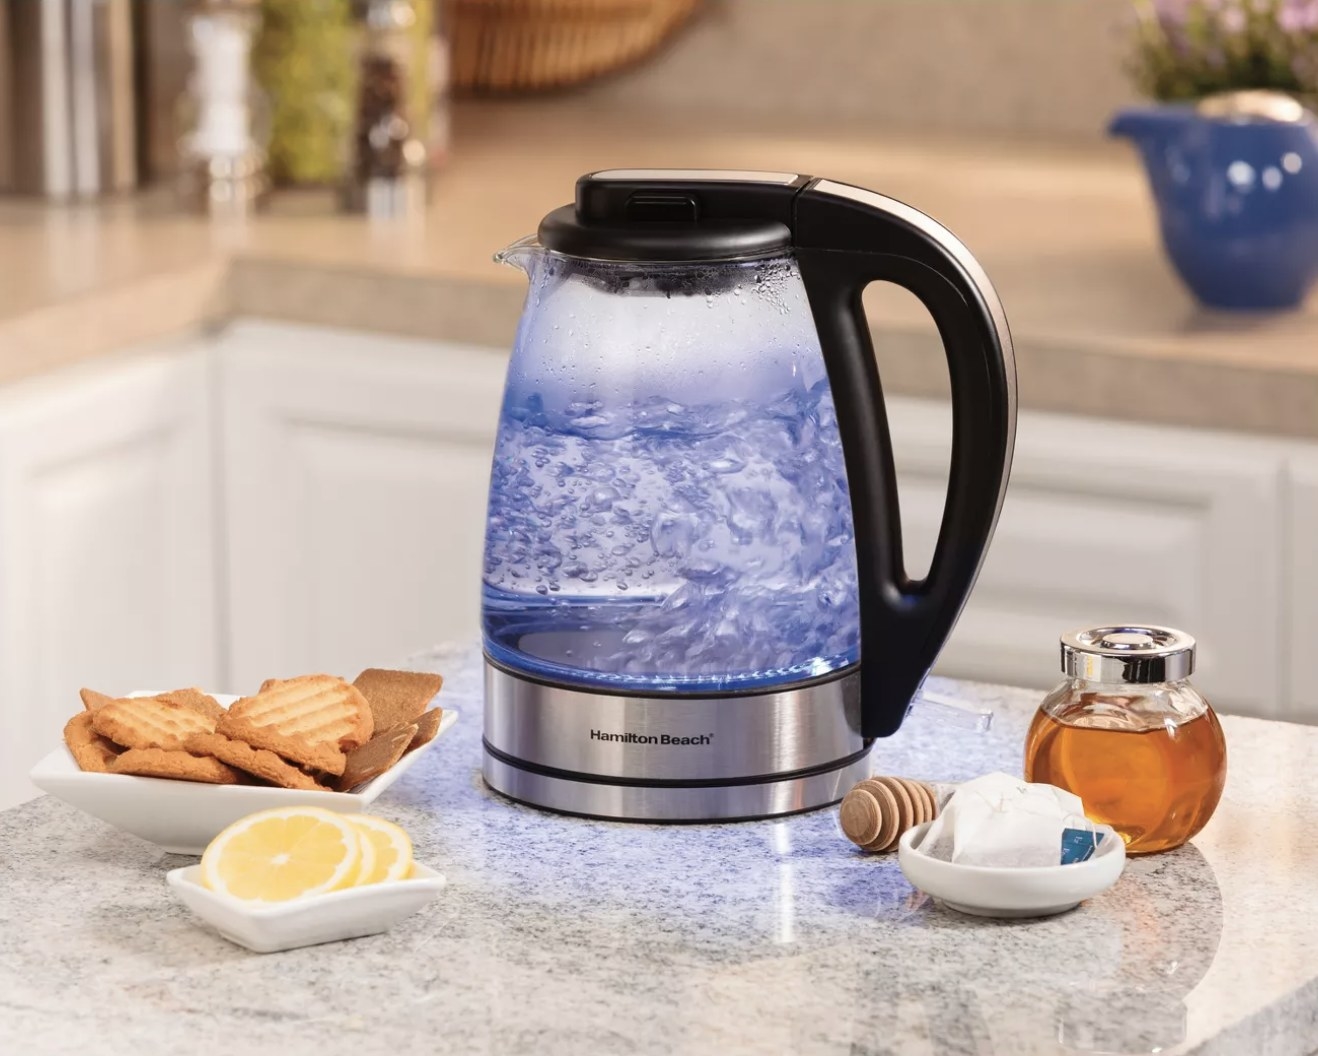 The electric kettle with water boiling inside